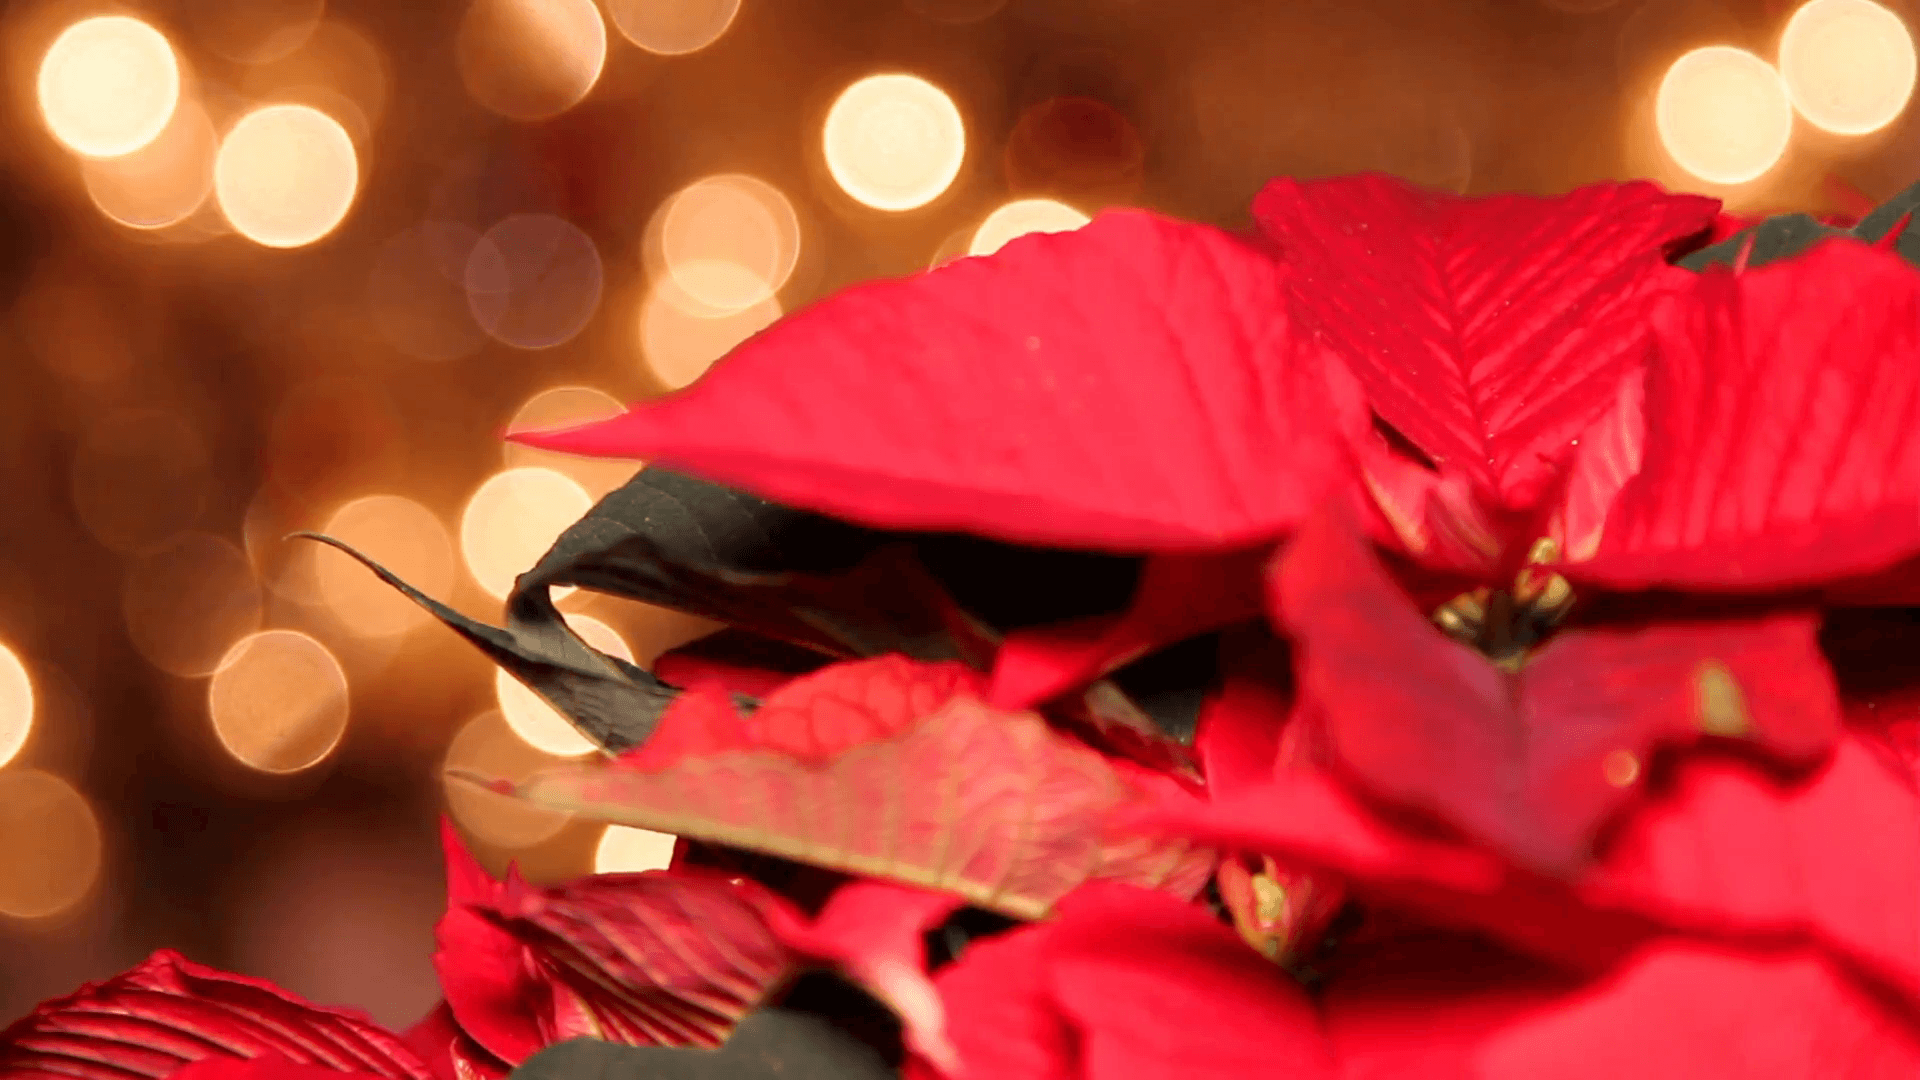 Red Poinsettia or Christmas flower with light effects and decoration